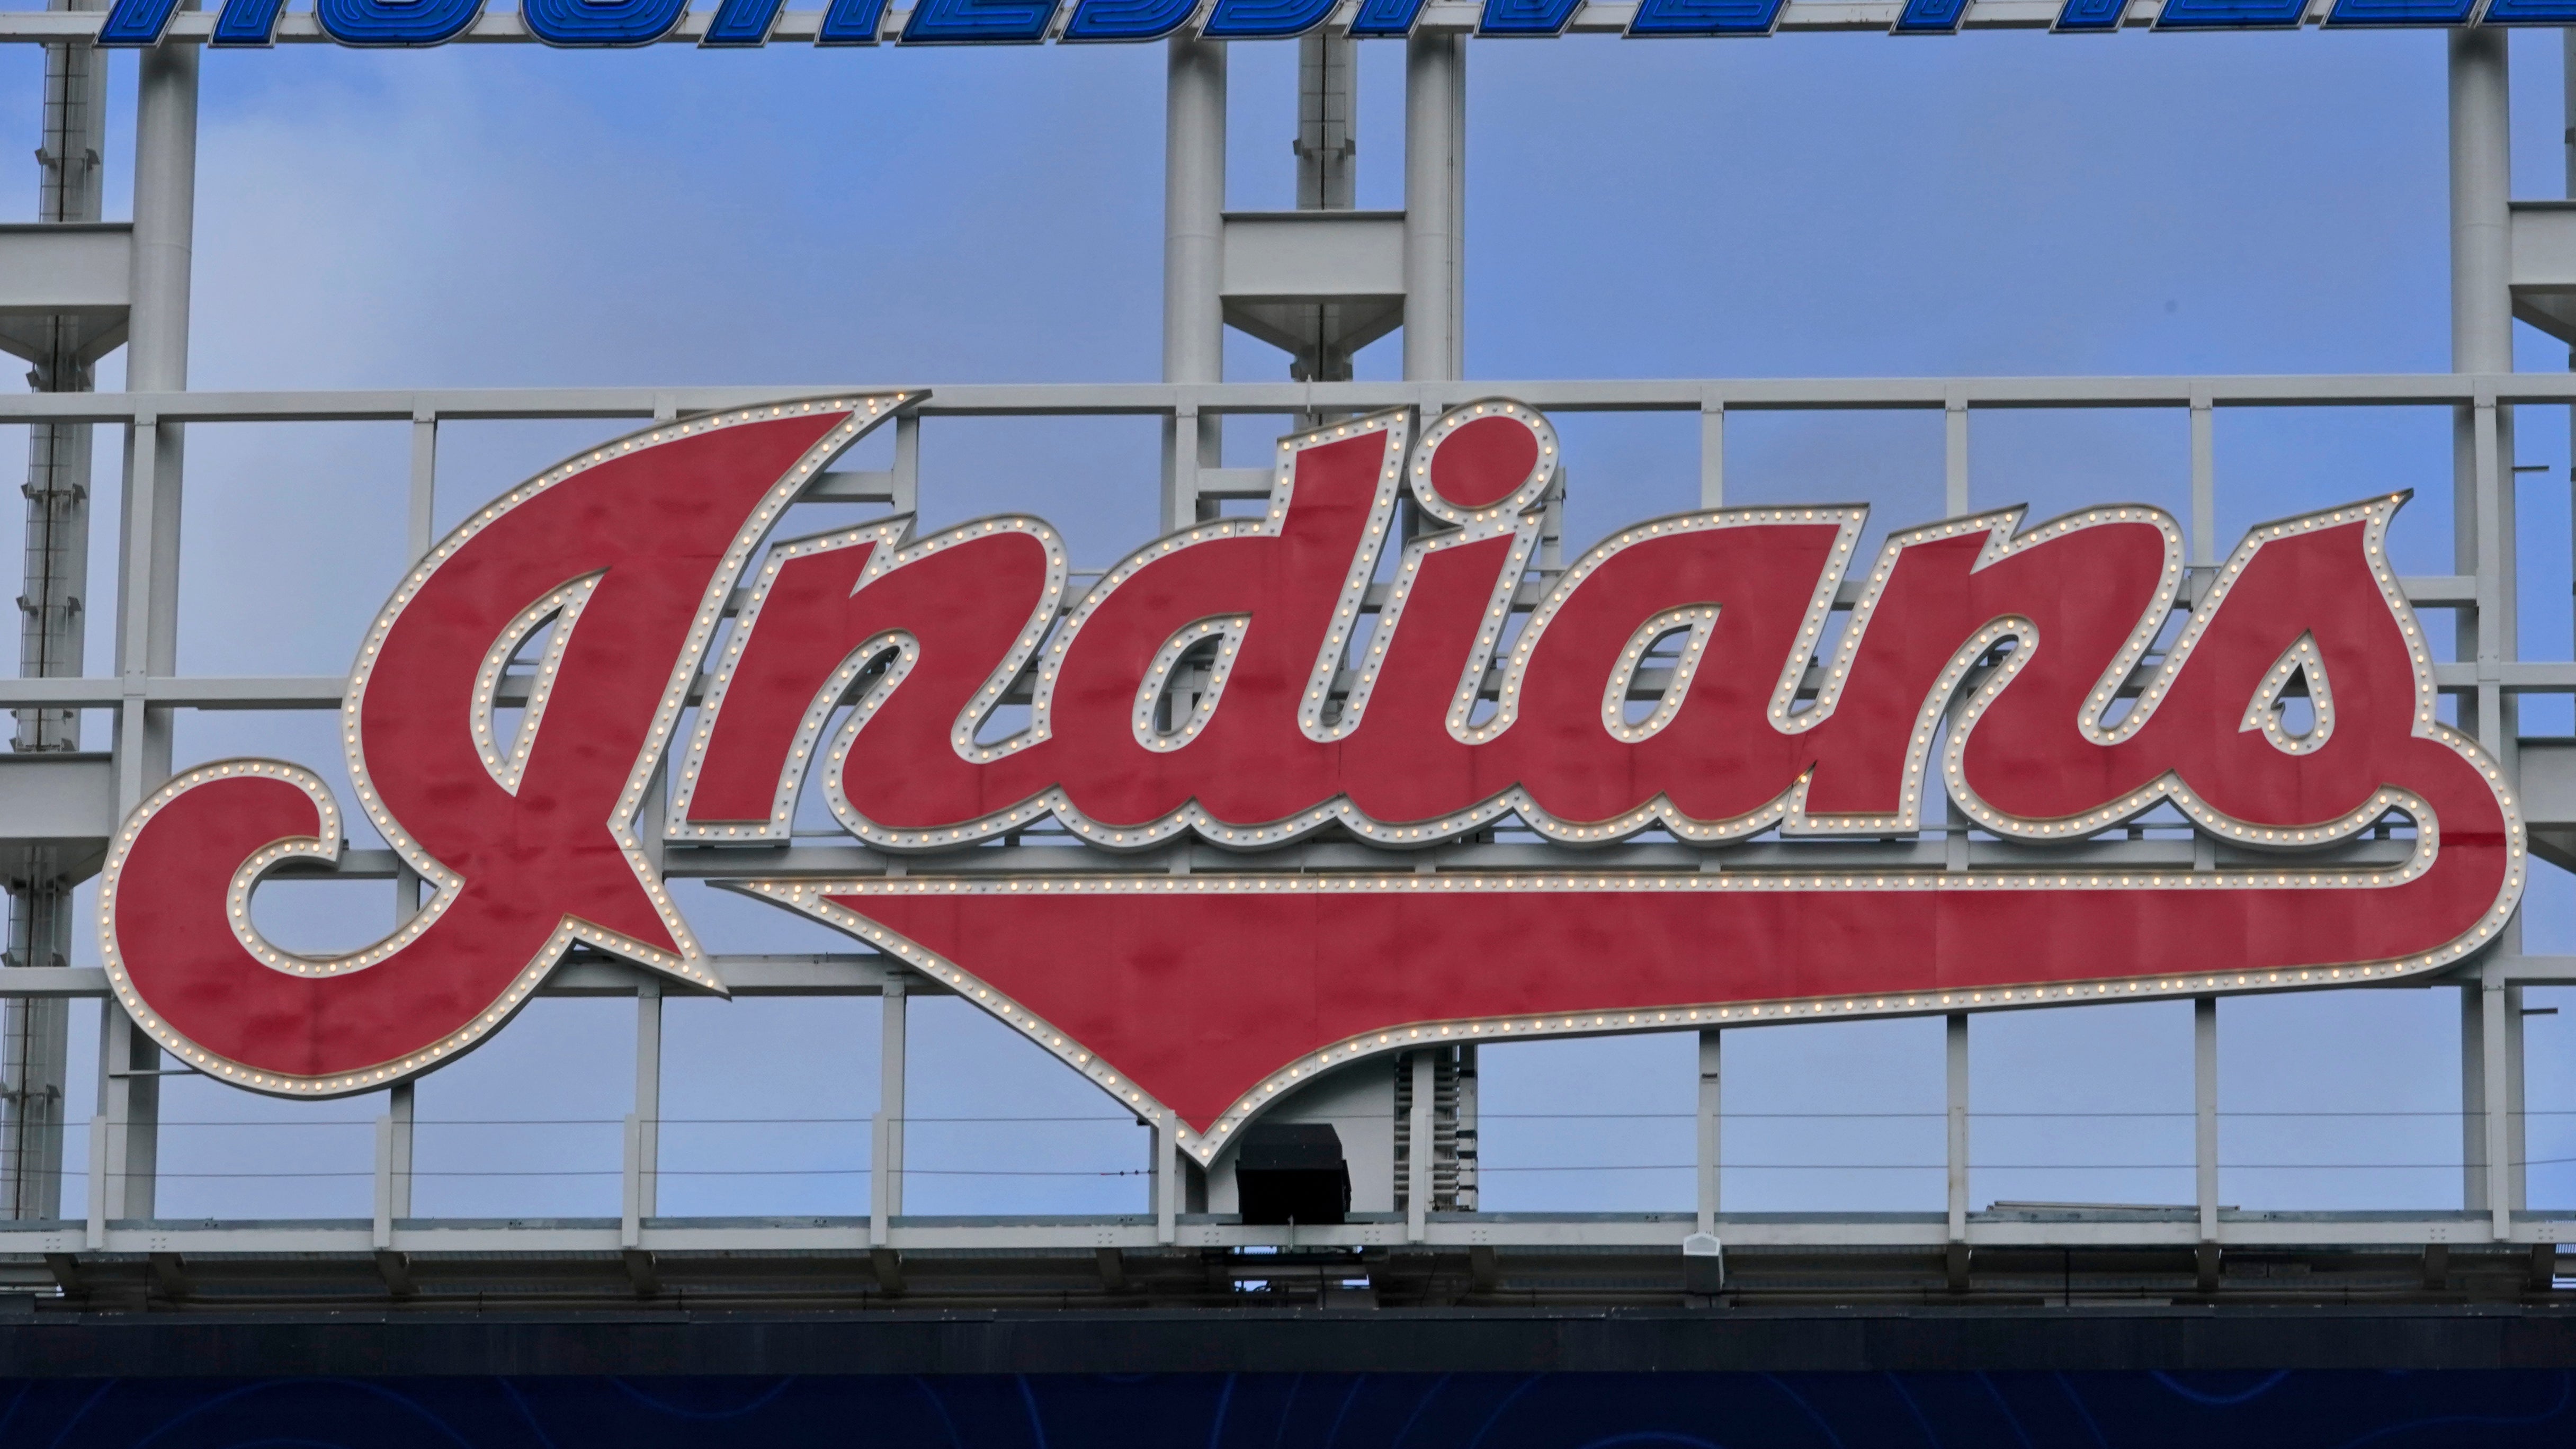 What made the Cleveland Indians finally change their name? 